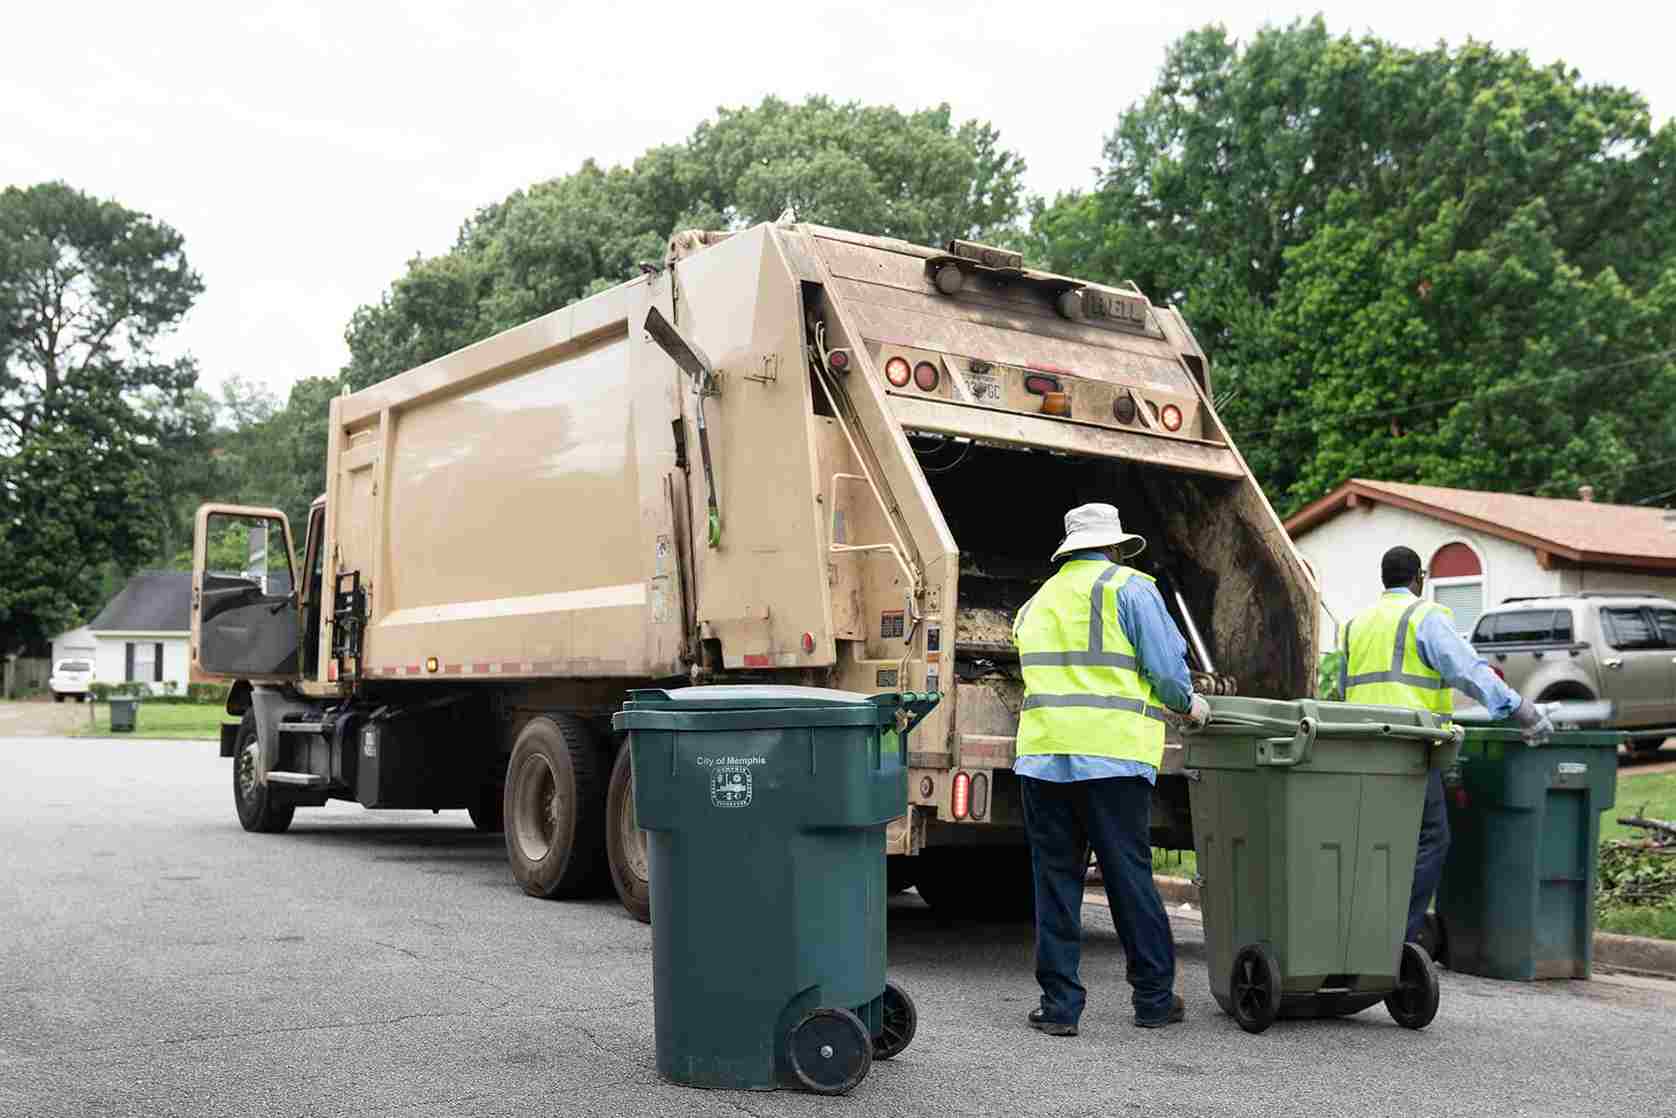 cleaning workers are disposing of hazardous waste in skip hire